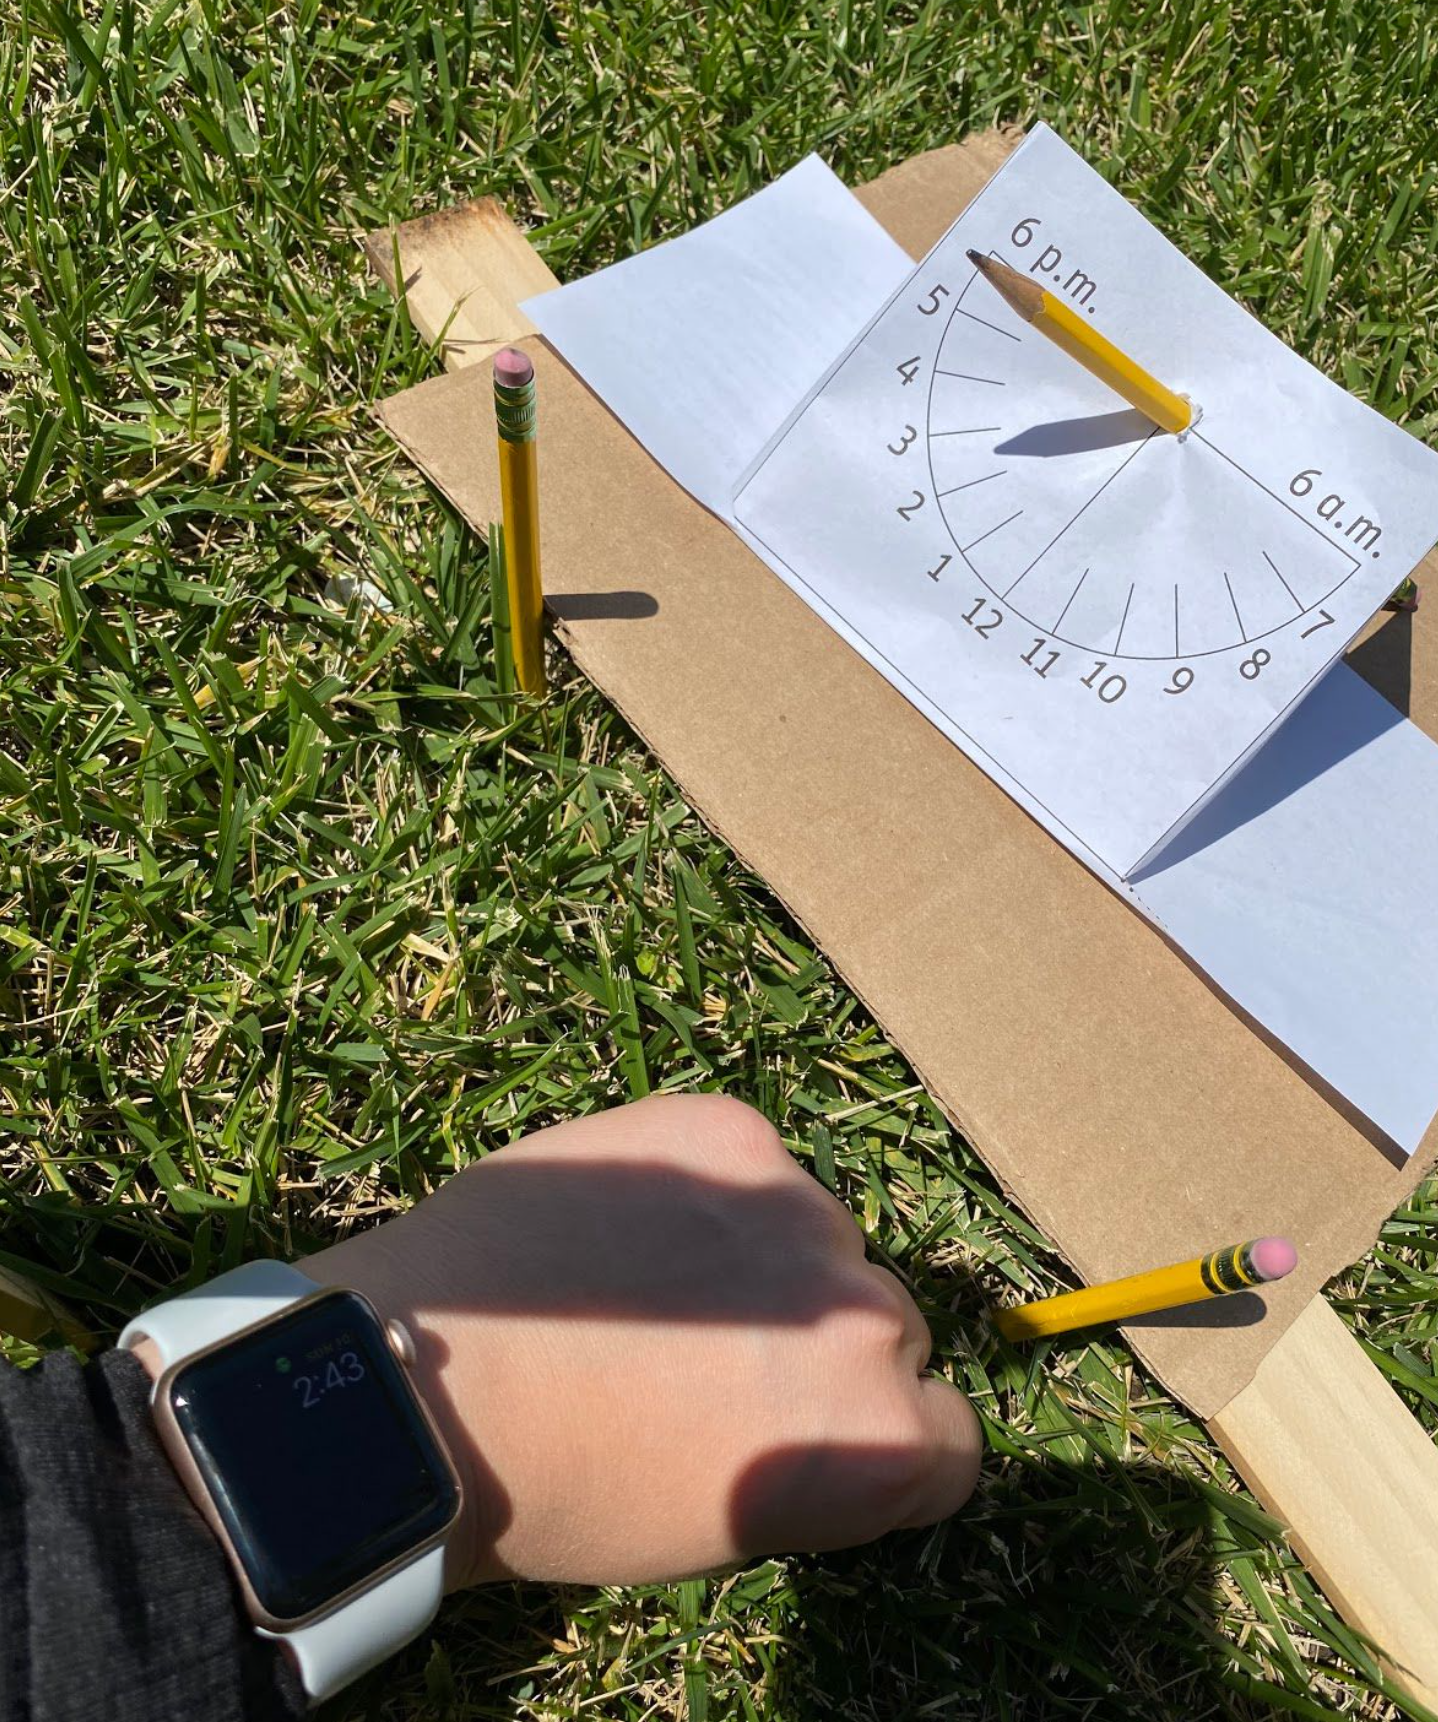 Sundial and Watch between 2:30 and 3:00